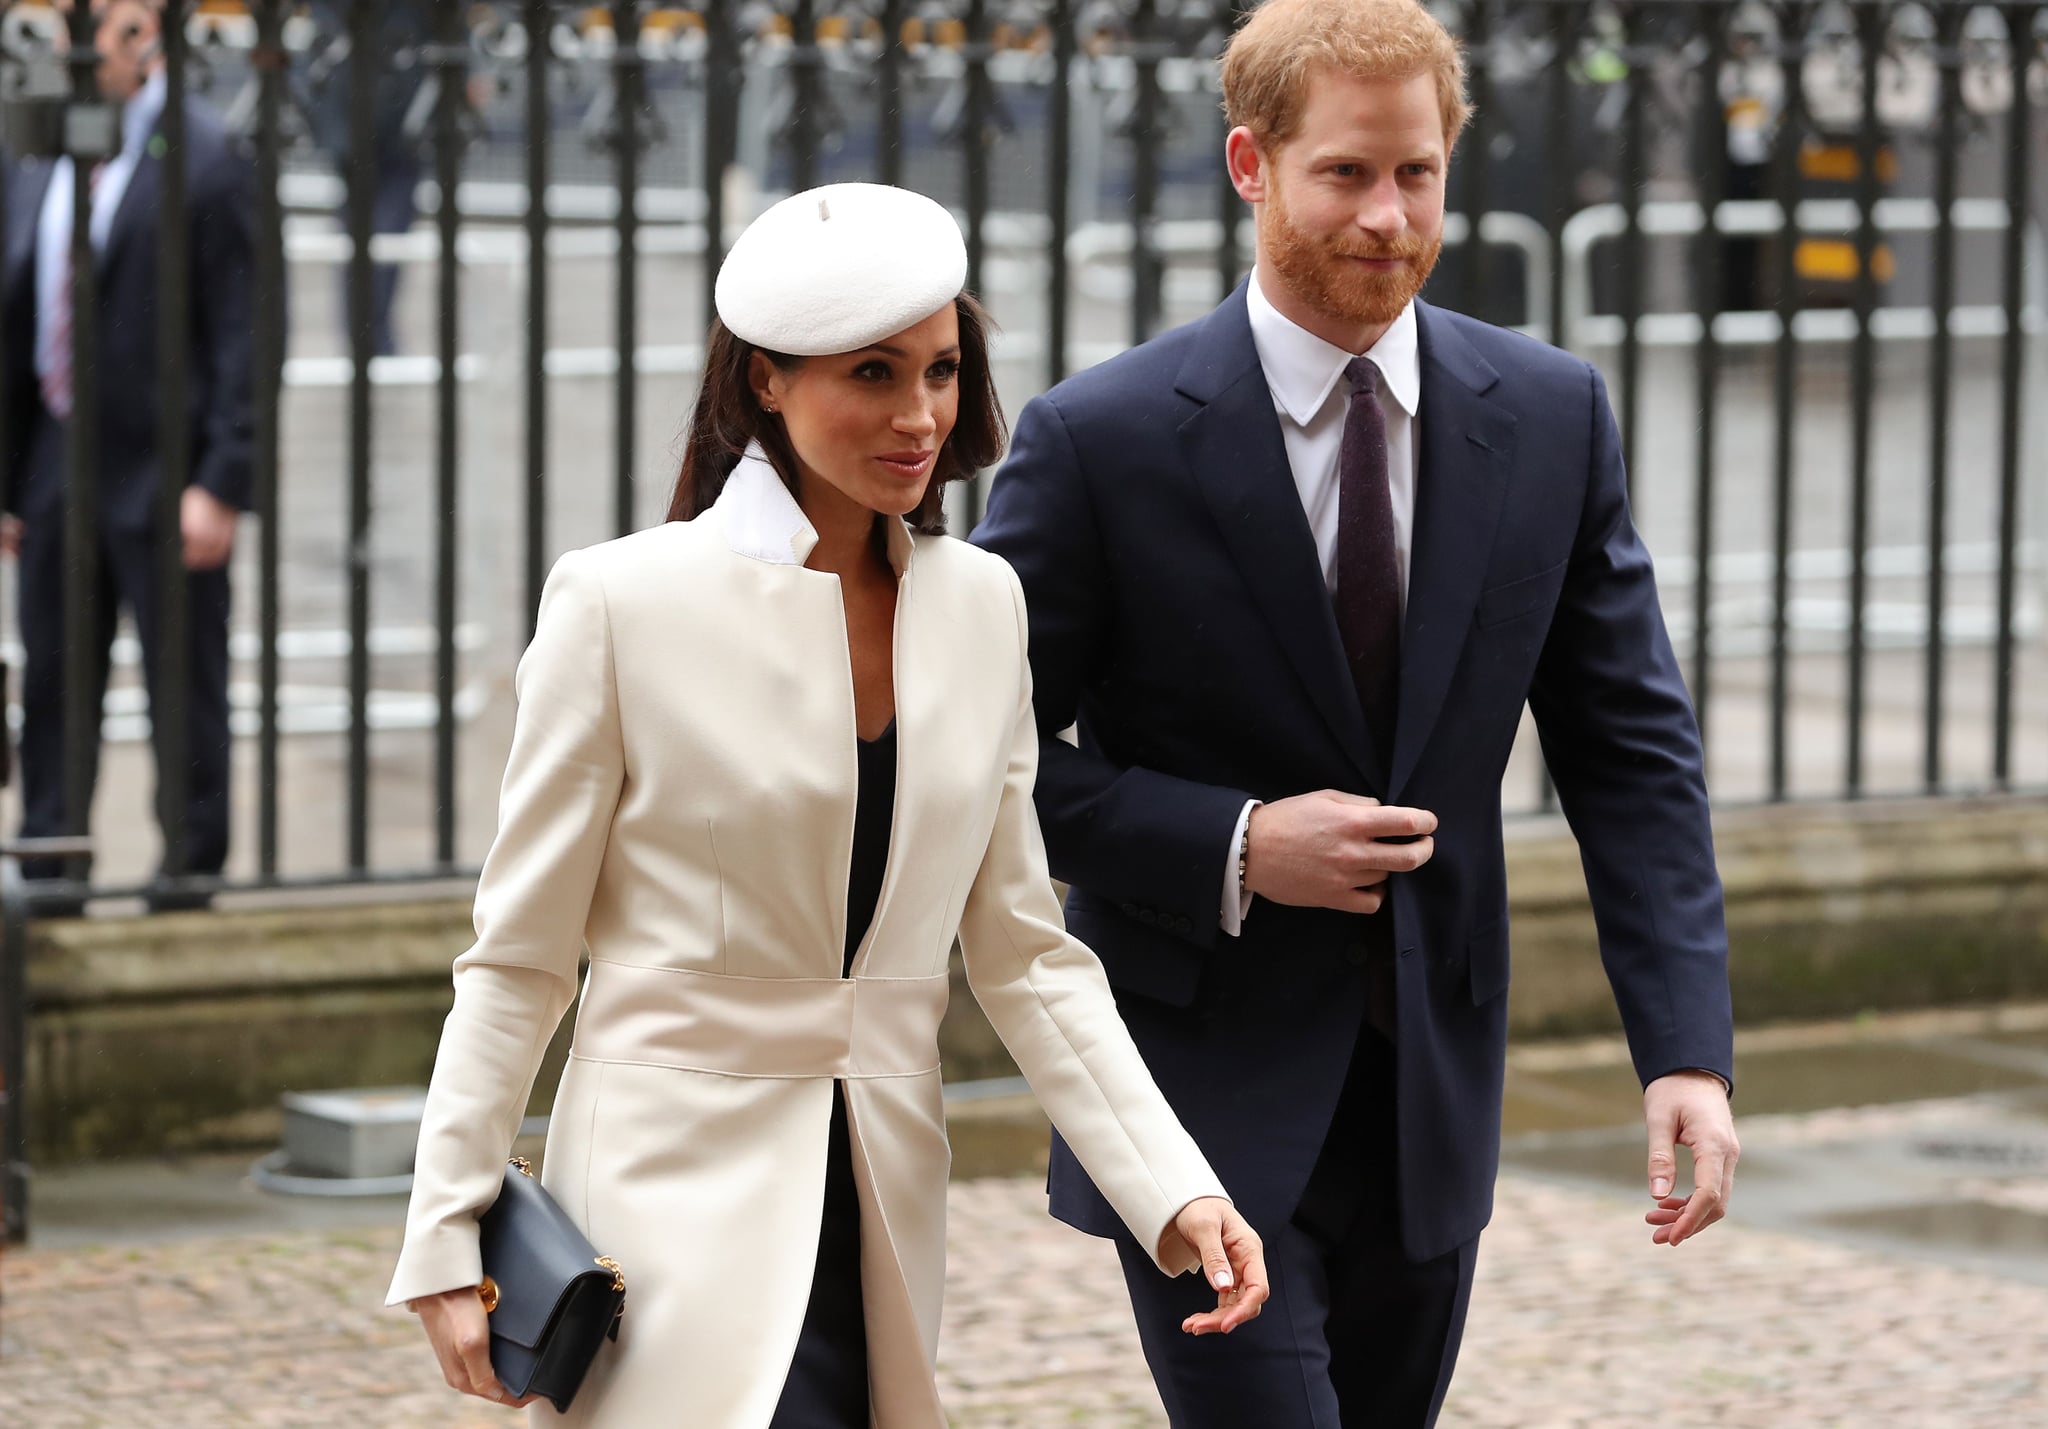 Britain's Prince Harry (R) and his fiancee US actress Meghan Markle attend a Commonwealth Day Service at Westminster Abbey in central London, on March 12, 2018.Britain's Queen Elizabeth II has been the Head of the Commonwealth throughout her reign. Organised by the Royal Commonwealth Society, the Service is the largest annual inter-faith gathering in the United Kingdom. / AFP PHOTO / Daniel LEAL-OLIVAS        (Photo credit should read DANIEL LEAL-OLIVAS/AFP/Getty Images)